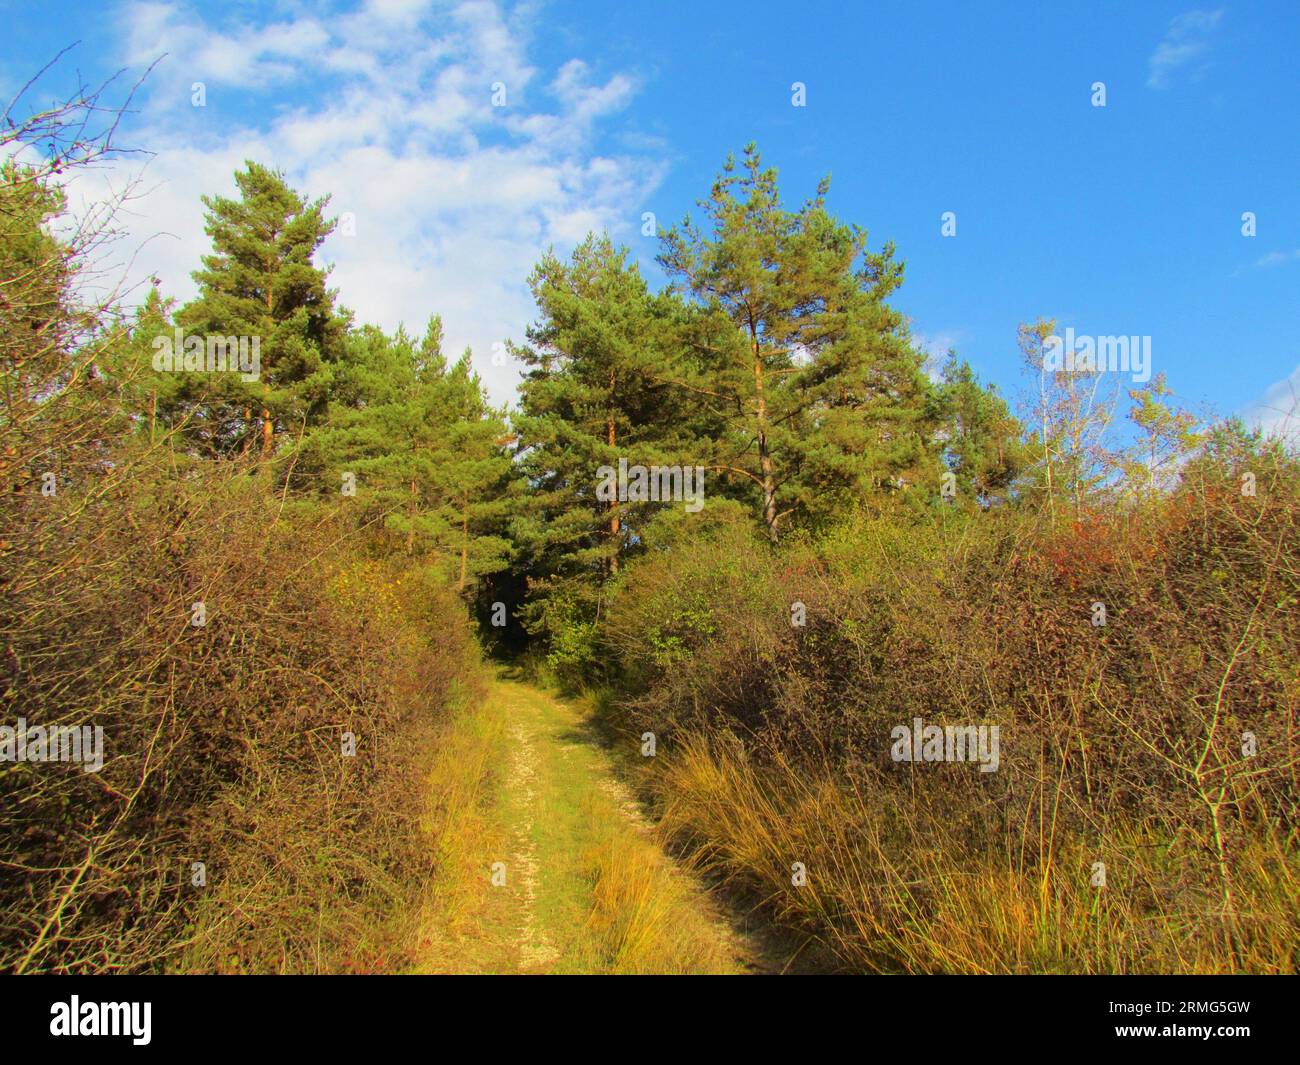 Road leading past dense bush vegetation into a scots pine forest in Slovenia Stock Photo